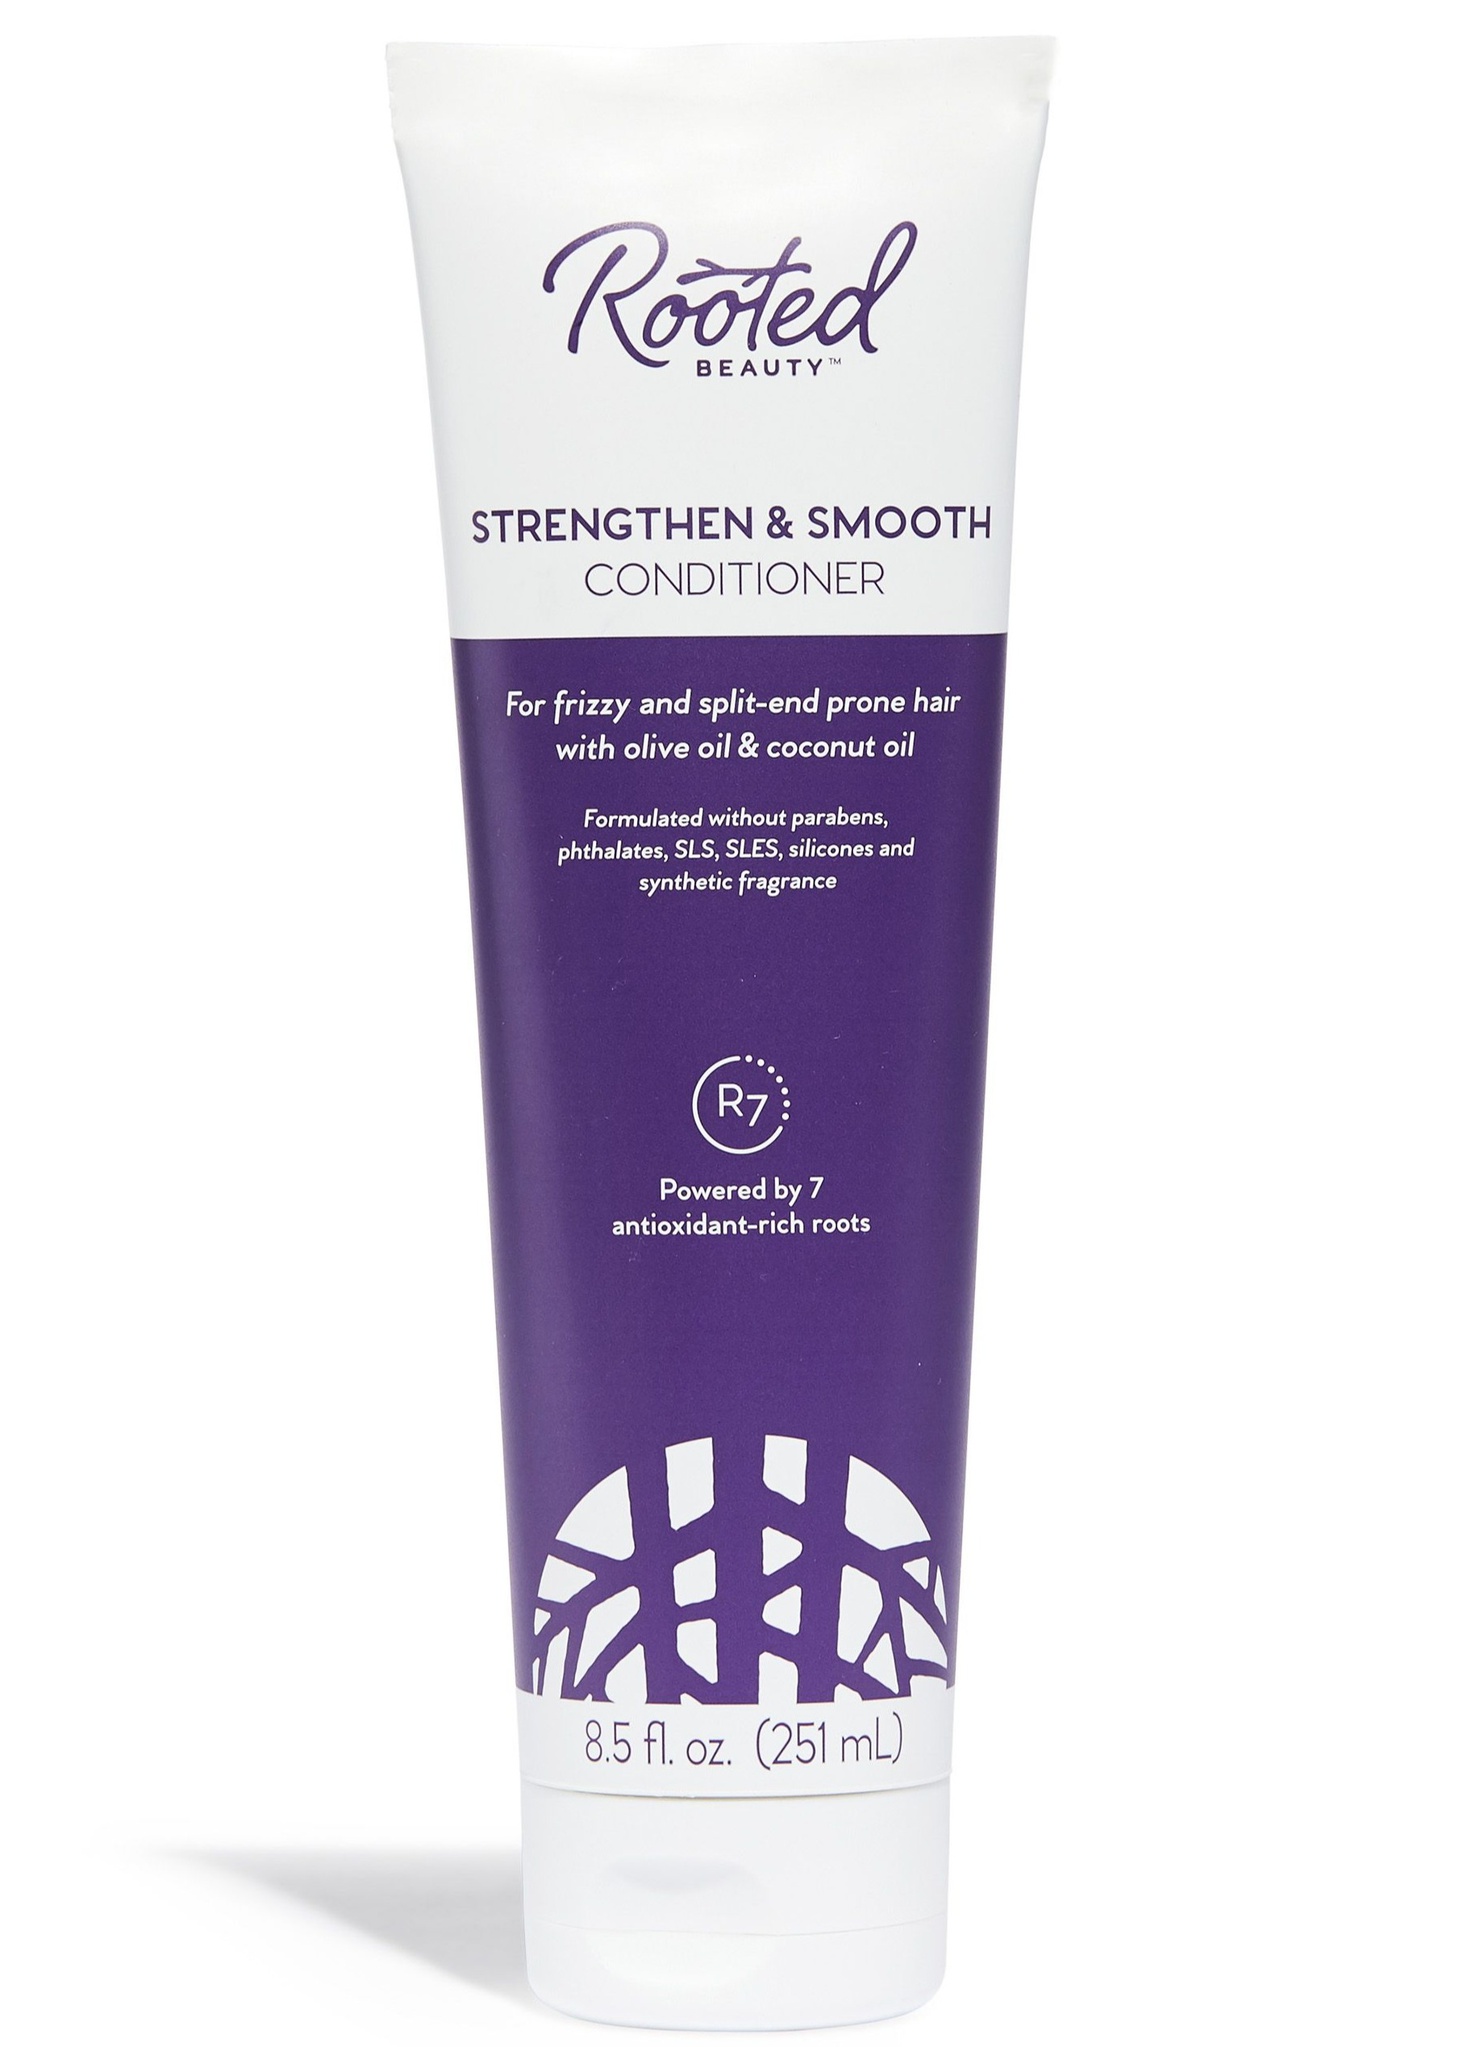 Rooted Beauty Strengthen And Smooth Conditioner